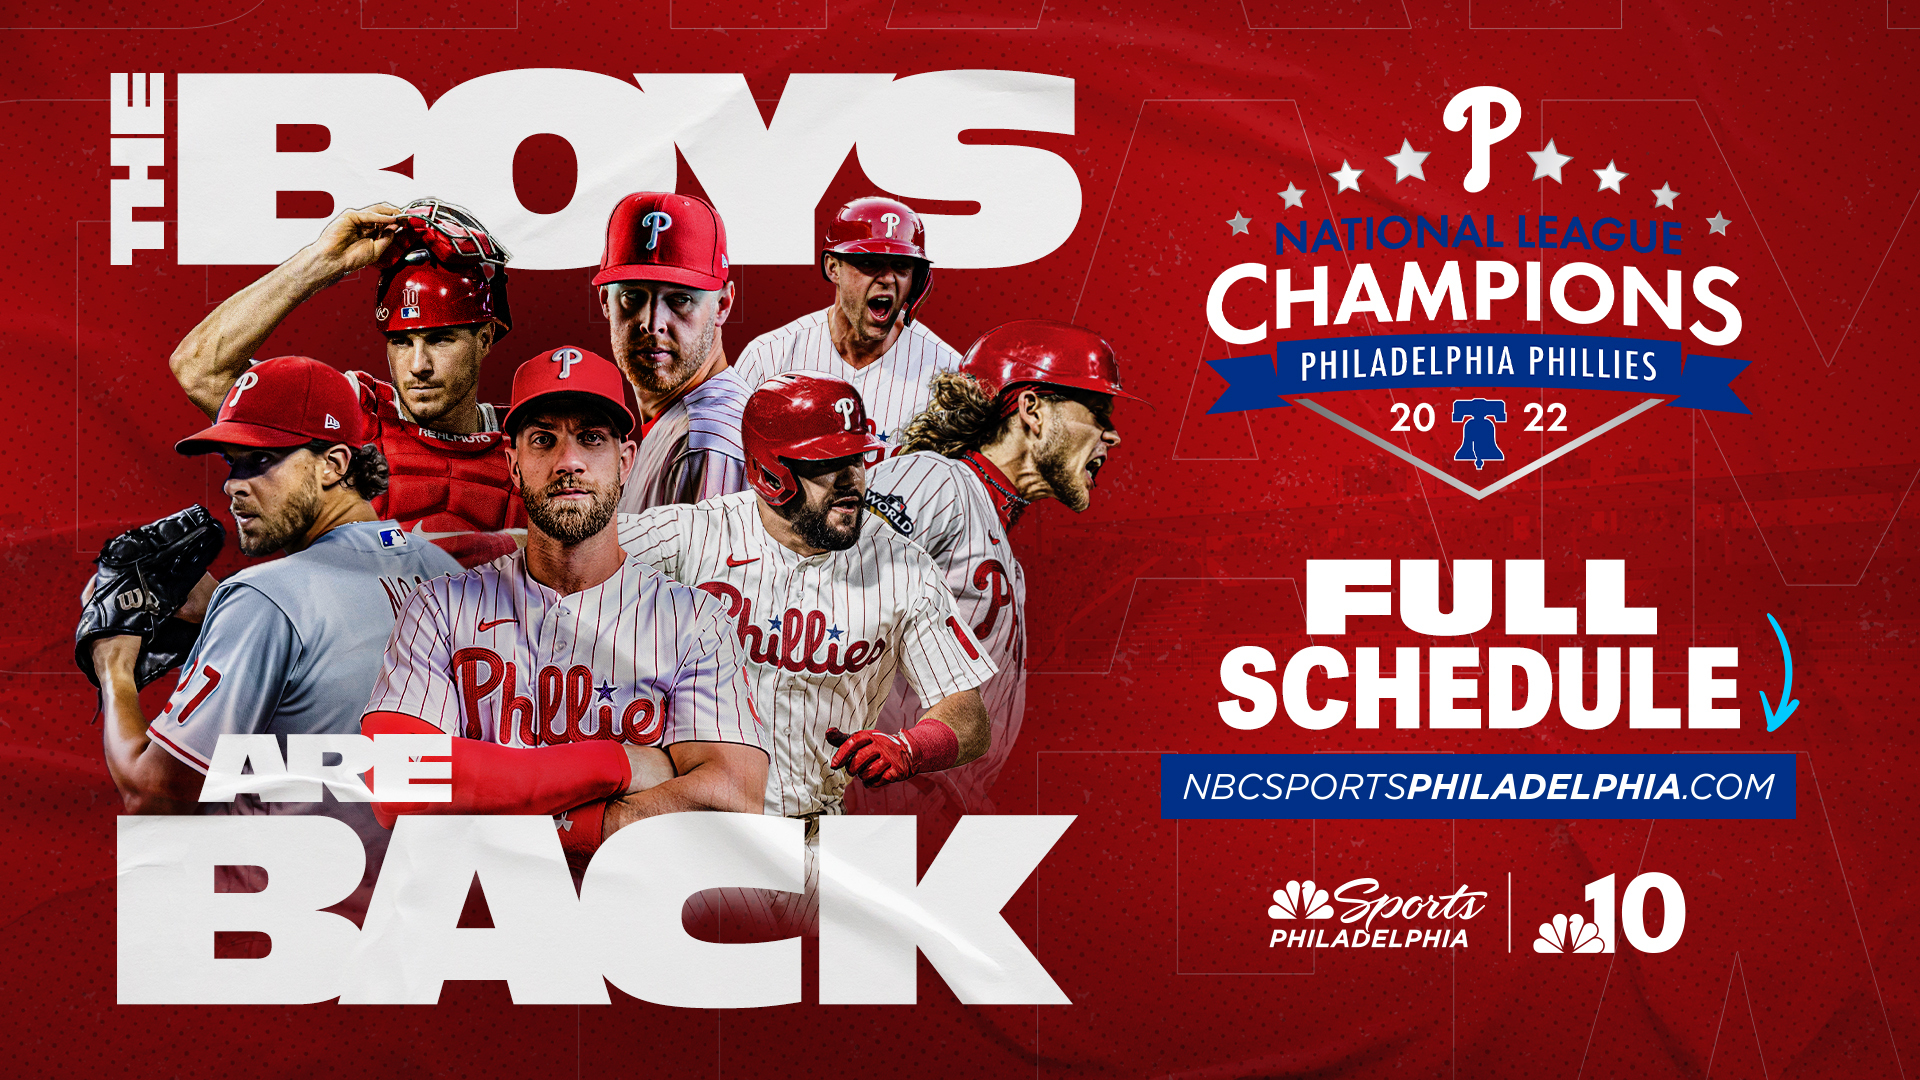 phillies today on tv